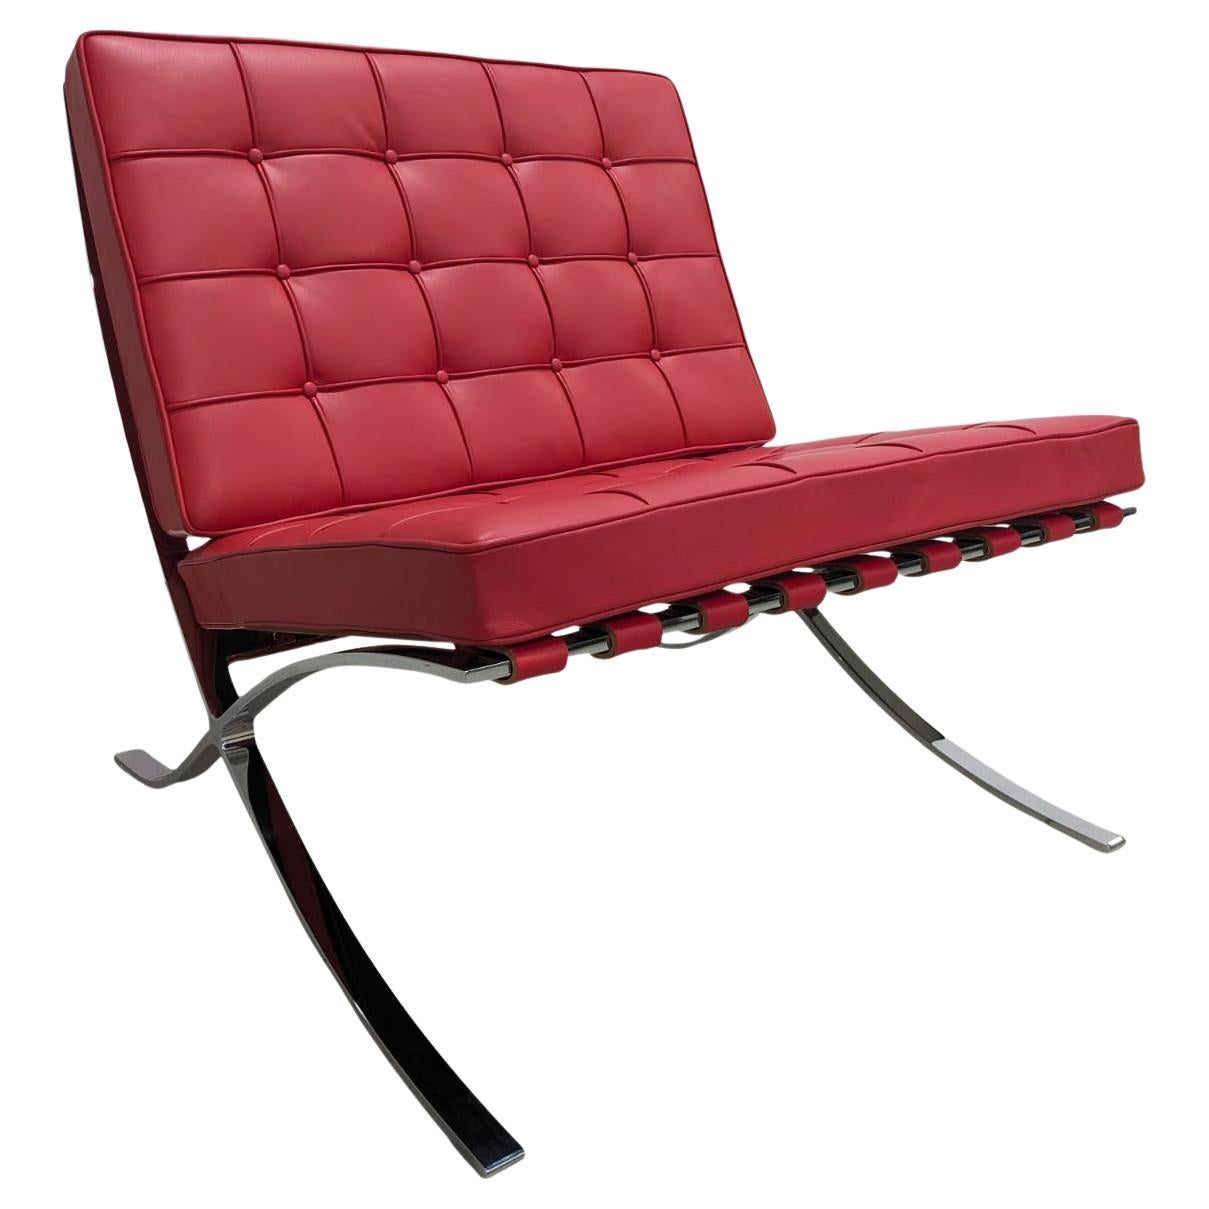 Ludwig Mies Van Der Rohe Bauhaus Red Barcelona Lounge Chair for Knoll, 1972 For Sale